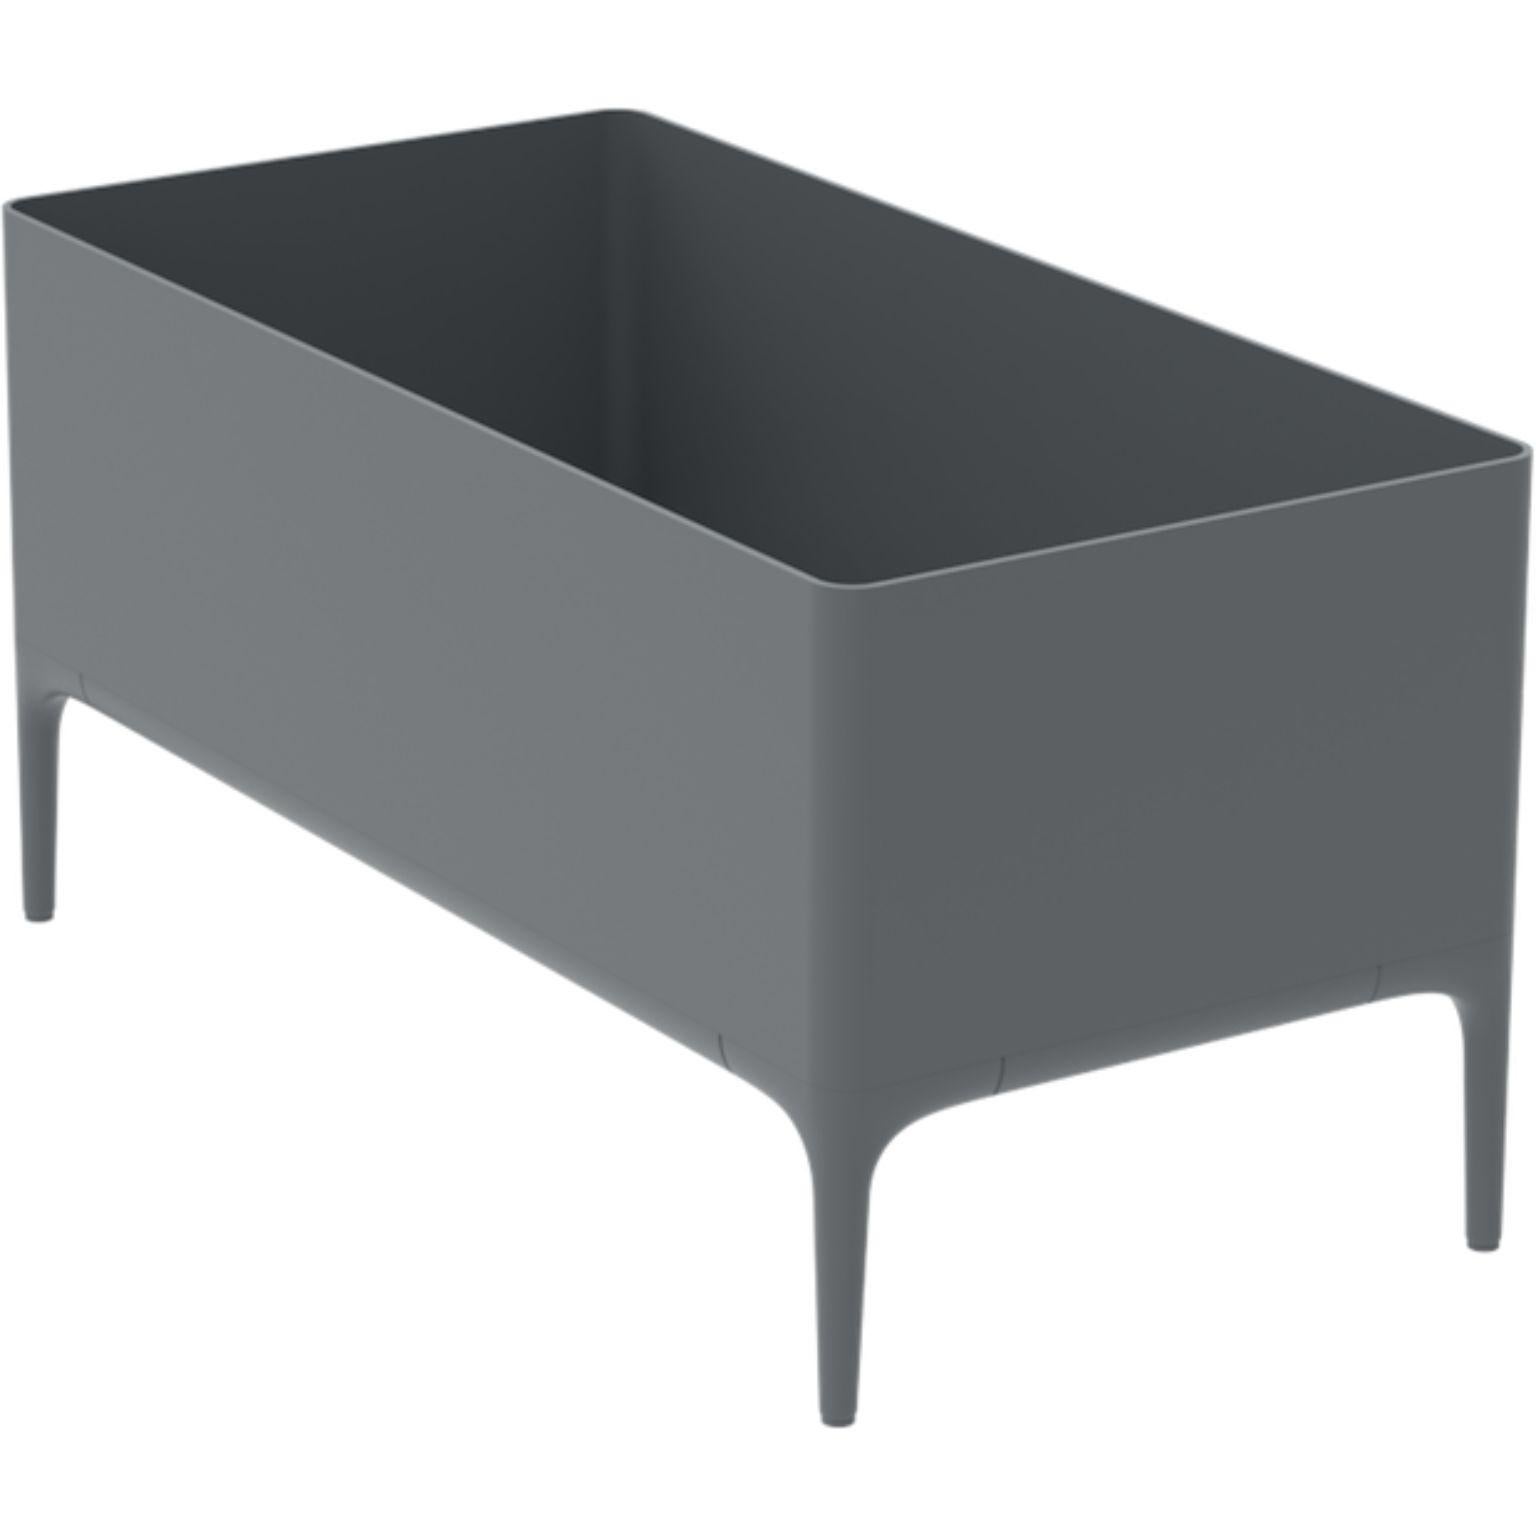 Xaloc Grey Planter by MOWEE
Dimensions: D90 x W45 x H45 cm
Material: Aluminium
Weight: 11 kg
Also Available in different colours and finishes. 

 Xaloc synthesizes the lines of interior furniture to extrapolate to the exterior, creating an